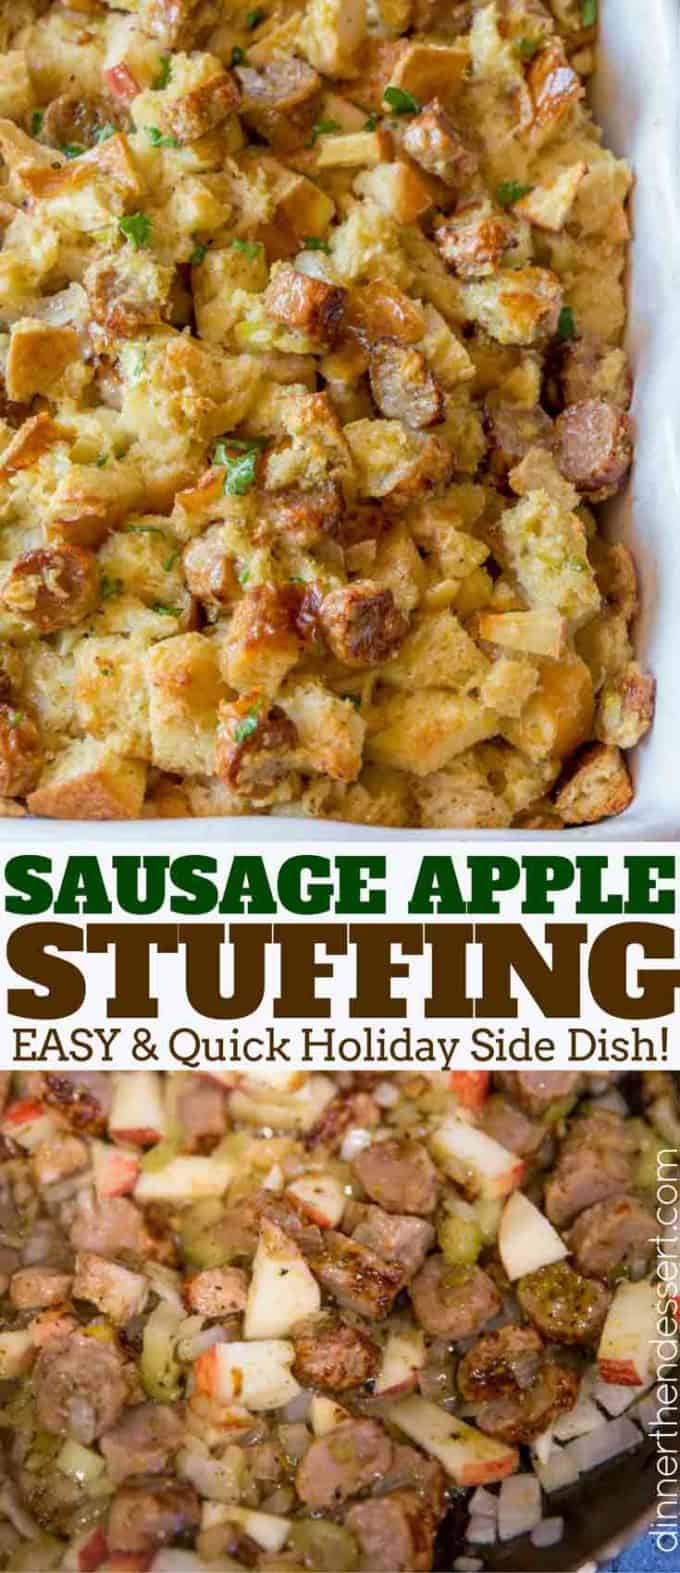 Easy Apple and Sausage Stuffing made with sage and celery is the classic dressing recipe you grew up eating. #thanksgiving #christmas #holiday #recipe #stuffing #sausagestuffing dinnerthendessert.com